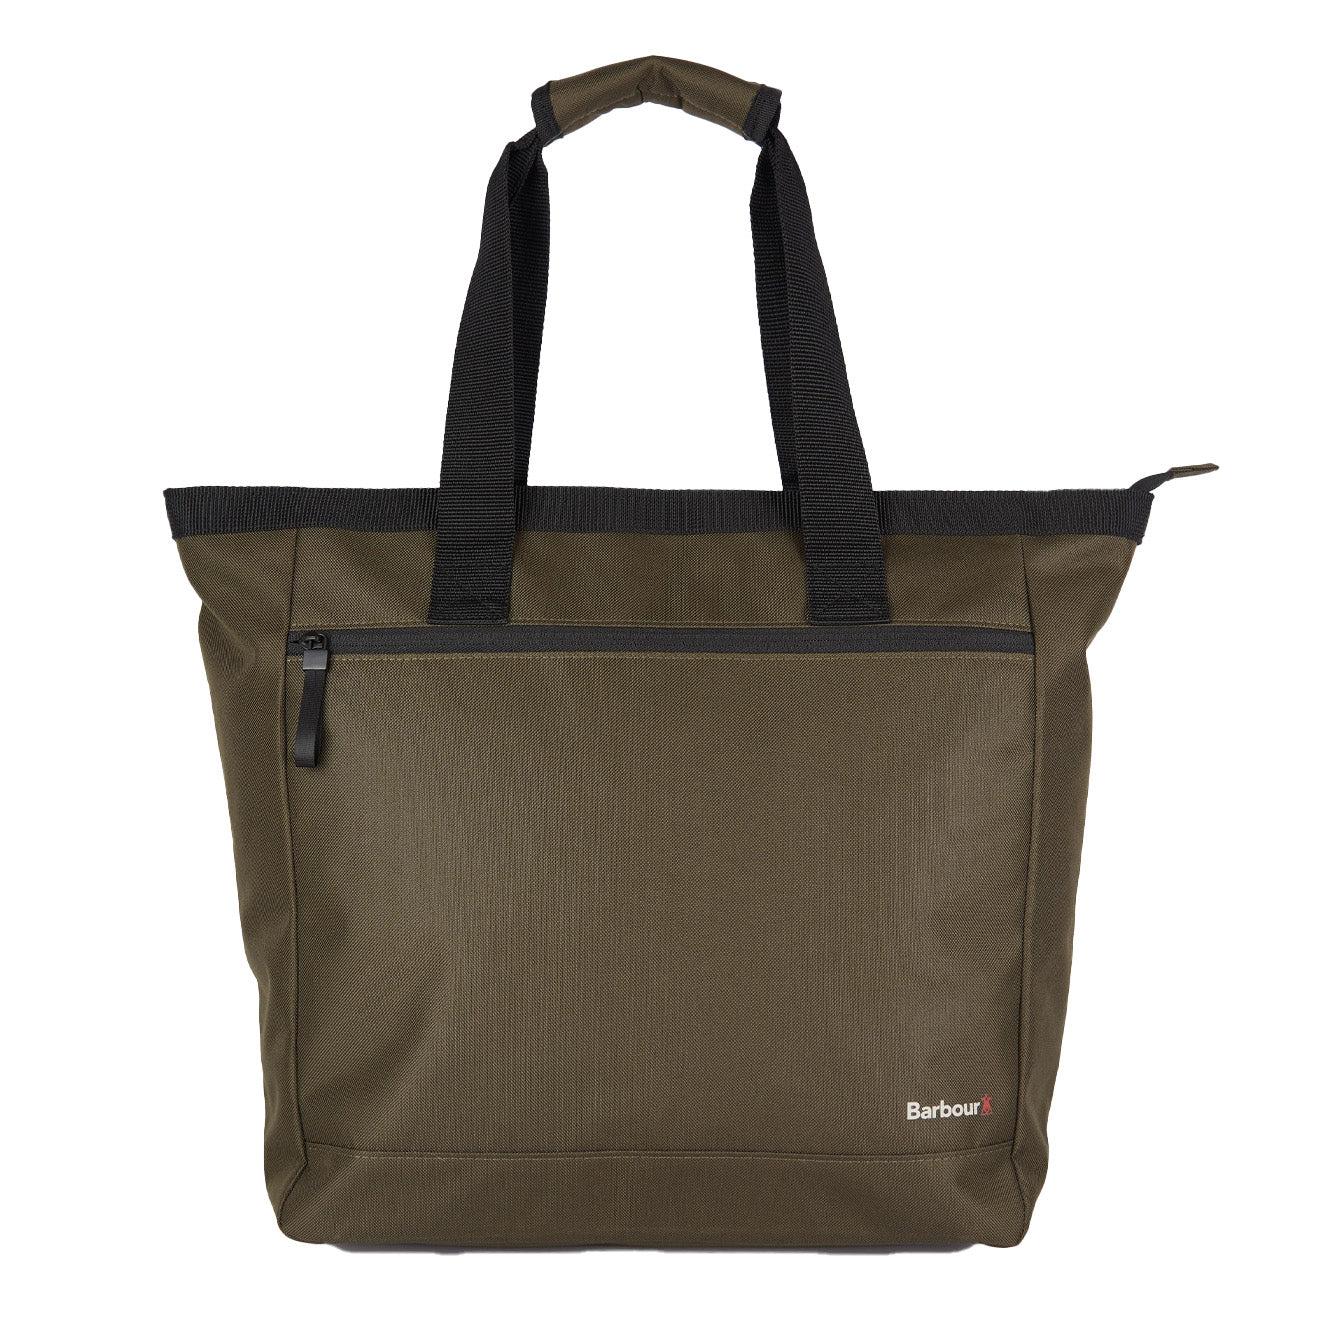 Barbour Arwin Canvas Tote Bag in Green | Lyst